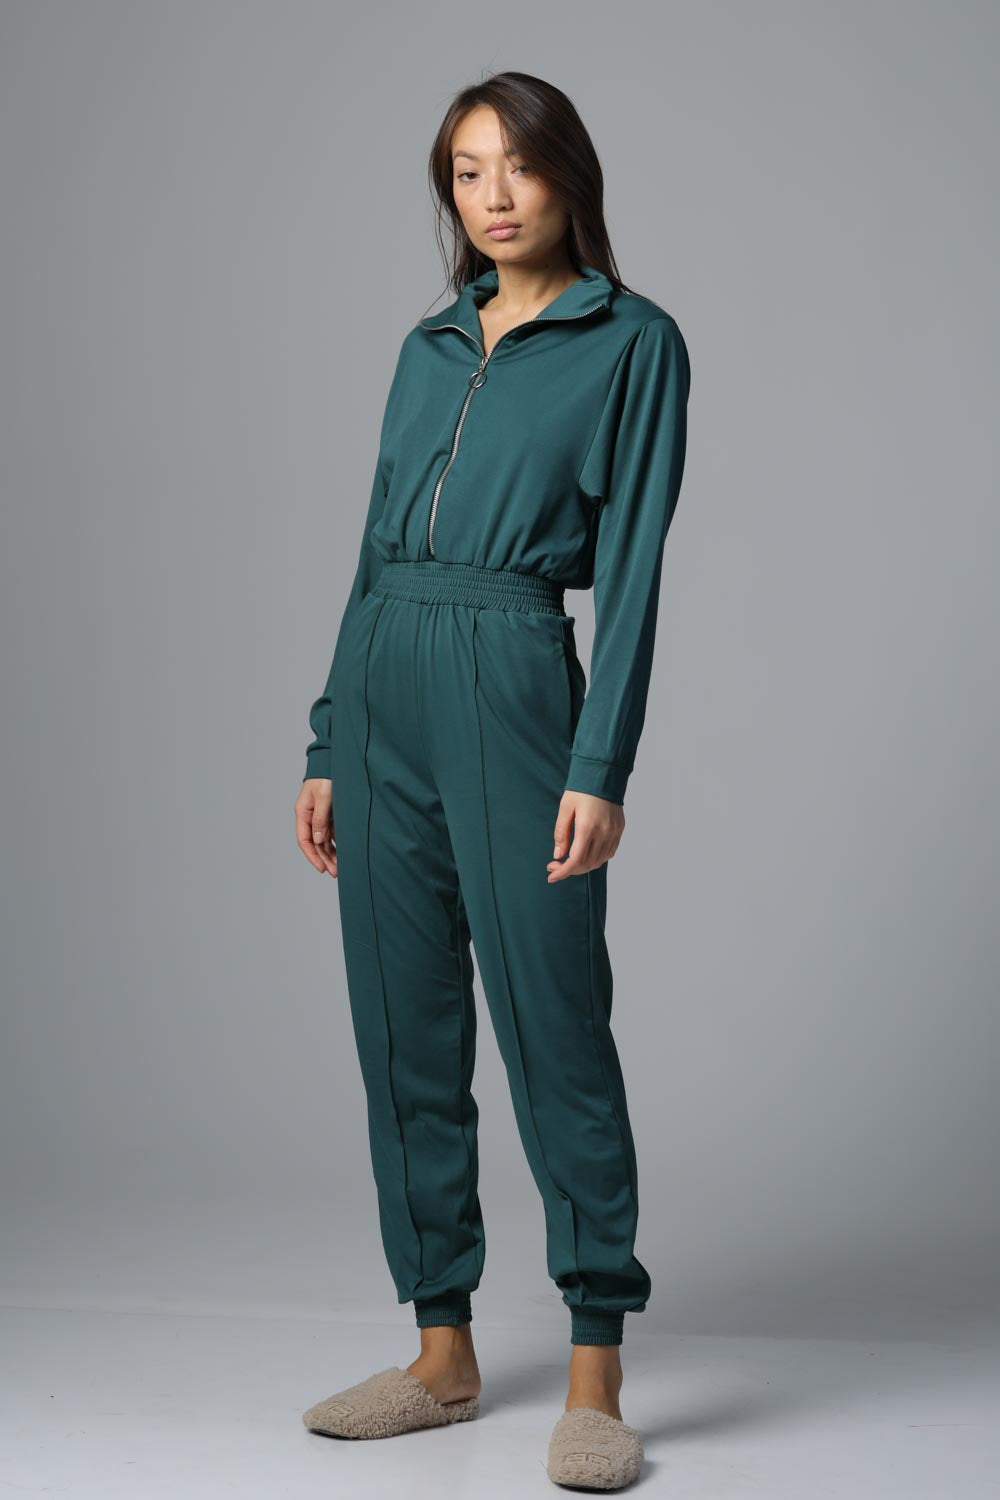 Eazy Green Jumpsuit